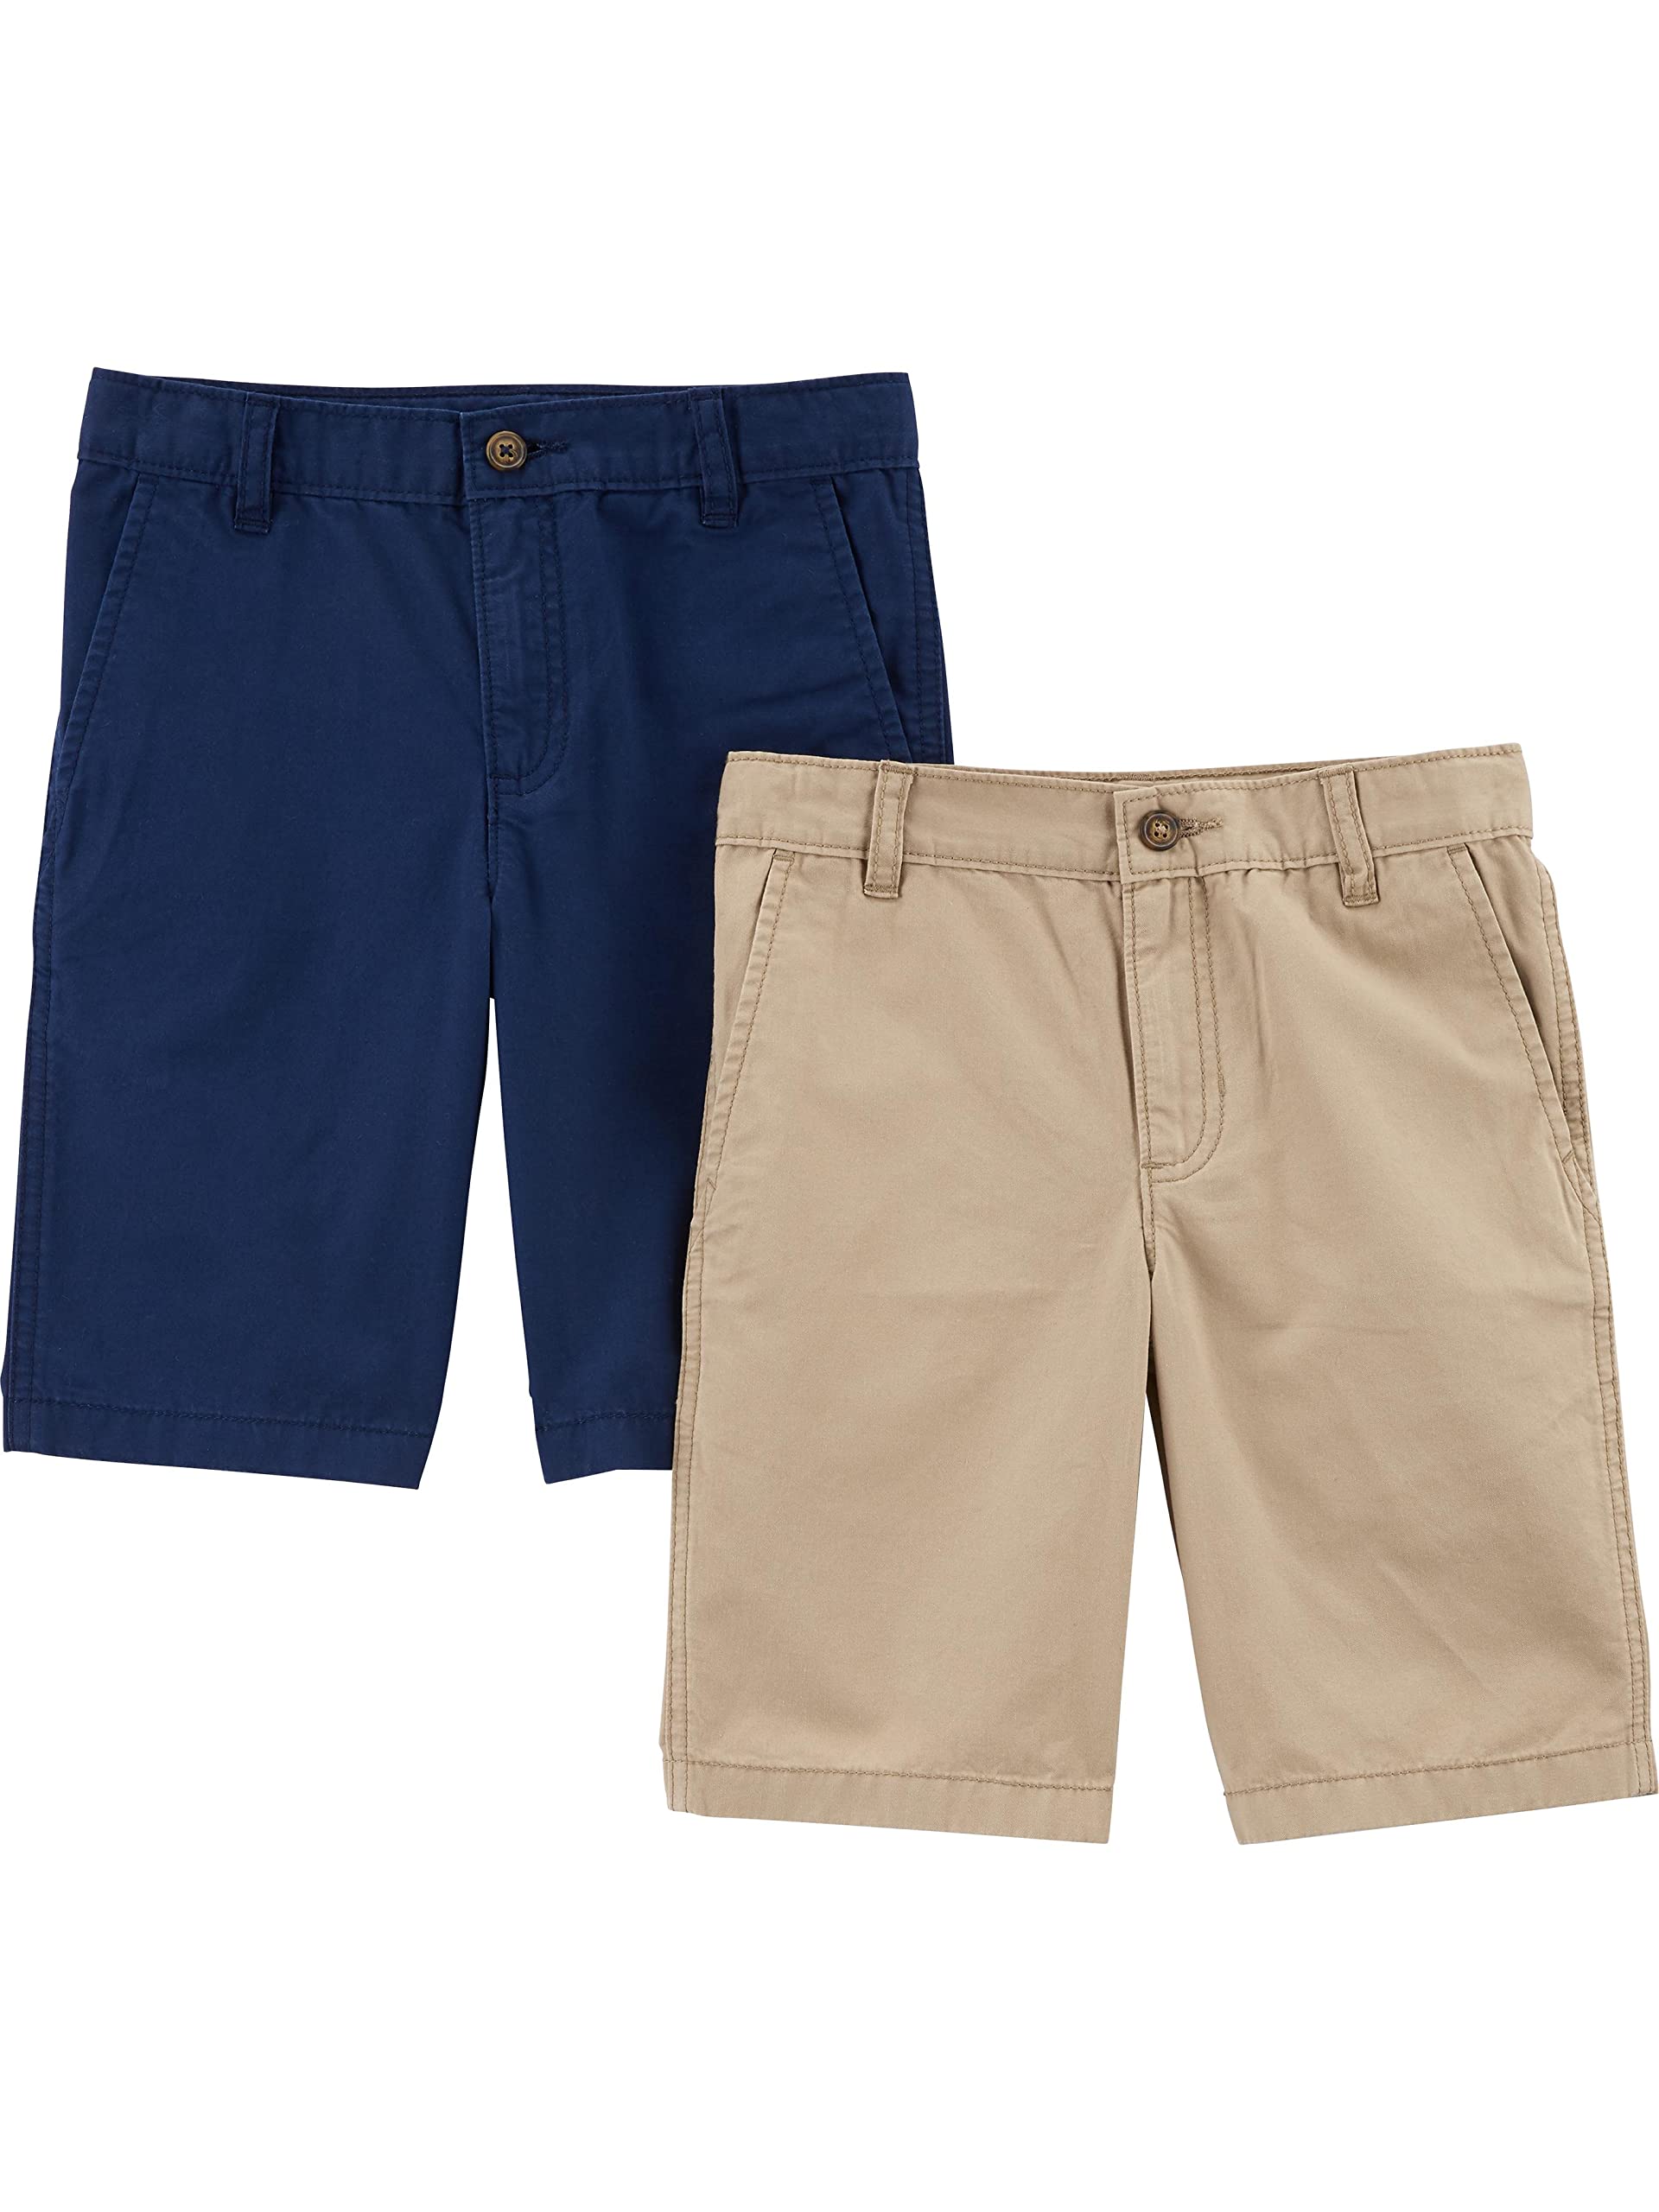 Simple Joys by Carter's Boys' Flat Front Shorts, Pack of 2